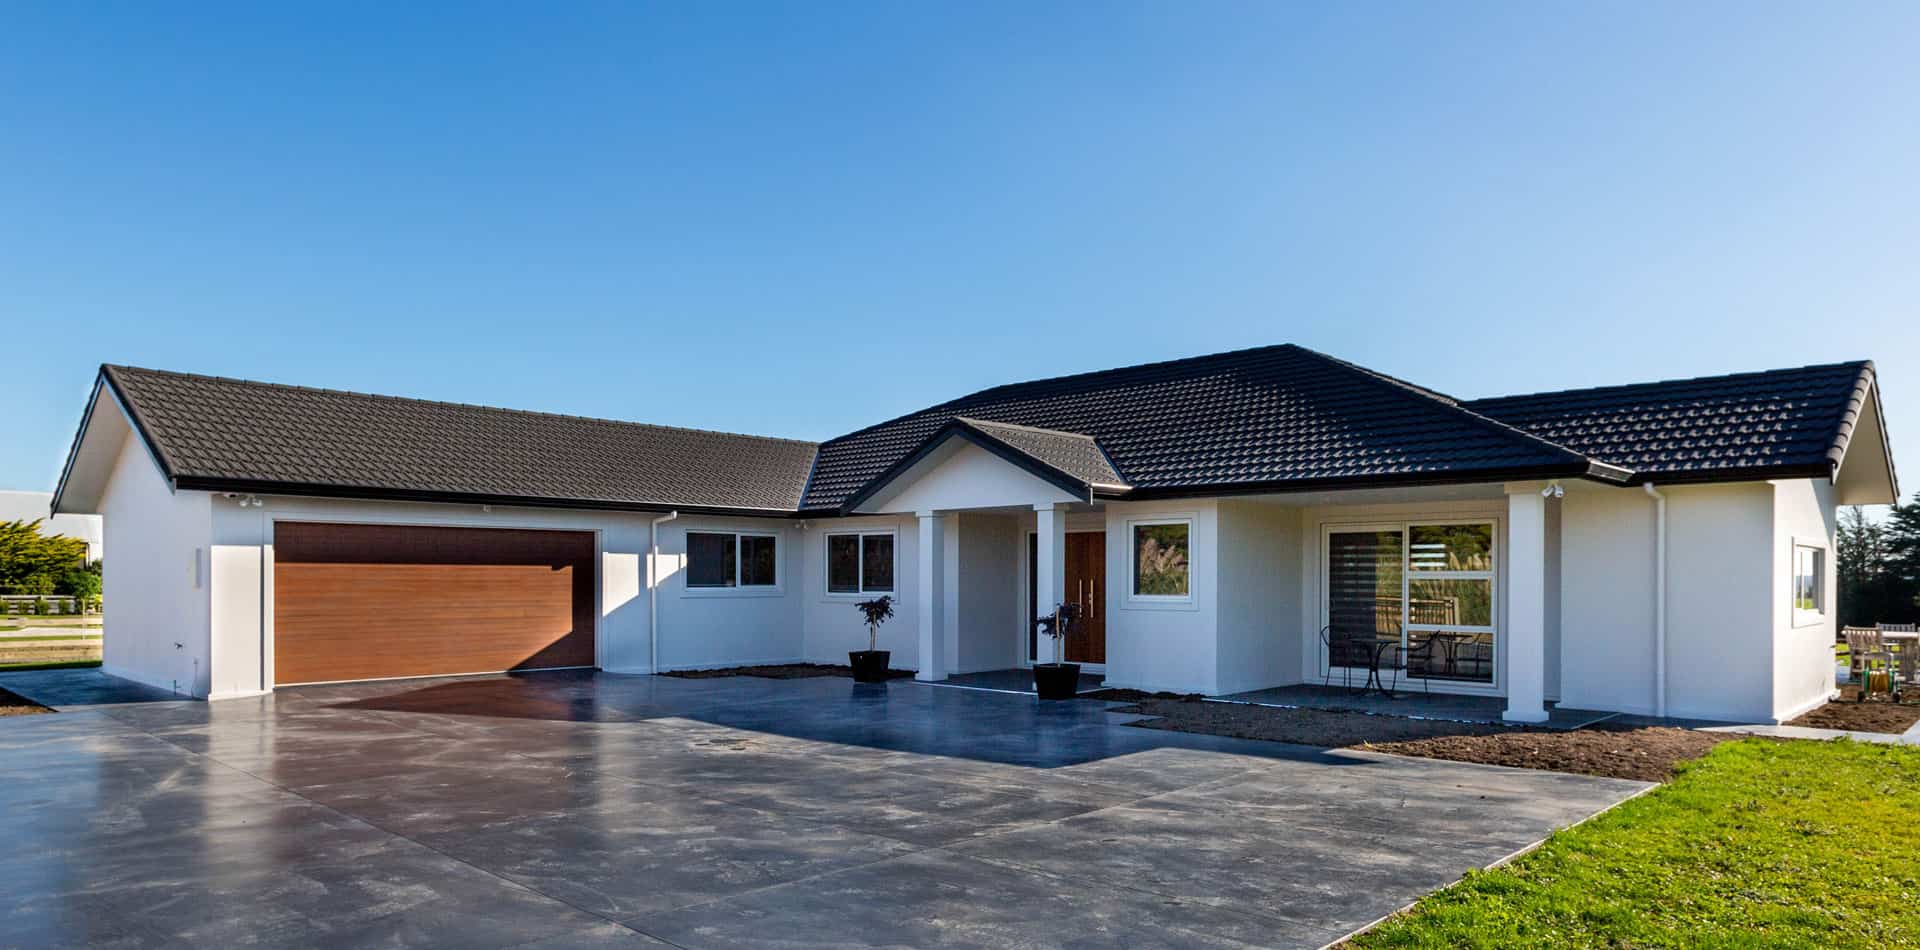 Fowler-Homes-design-and-build-new-zealand-wide-previous-builds-Manawatu-Meads-1